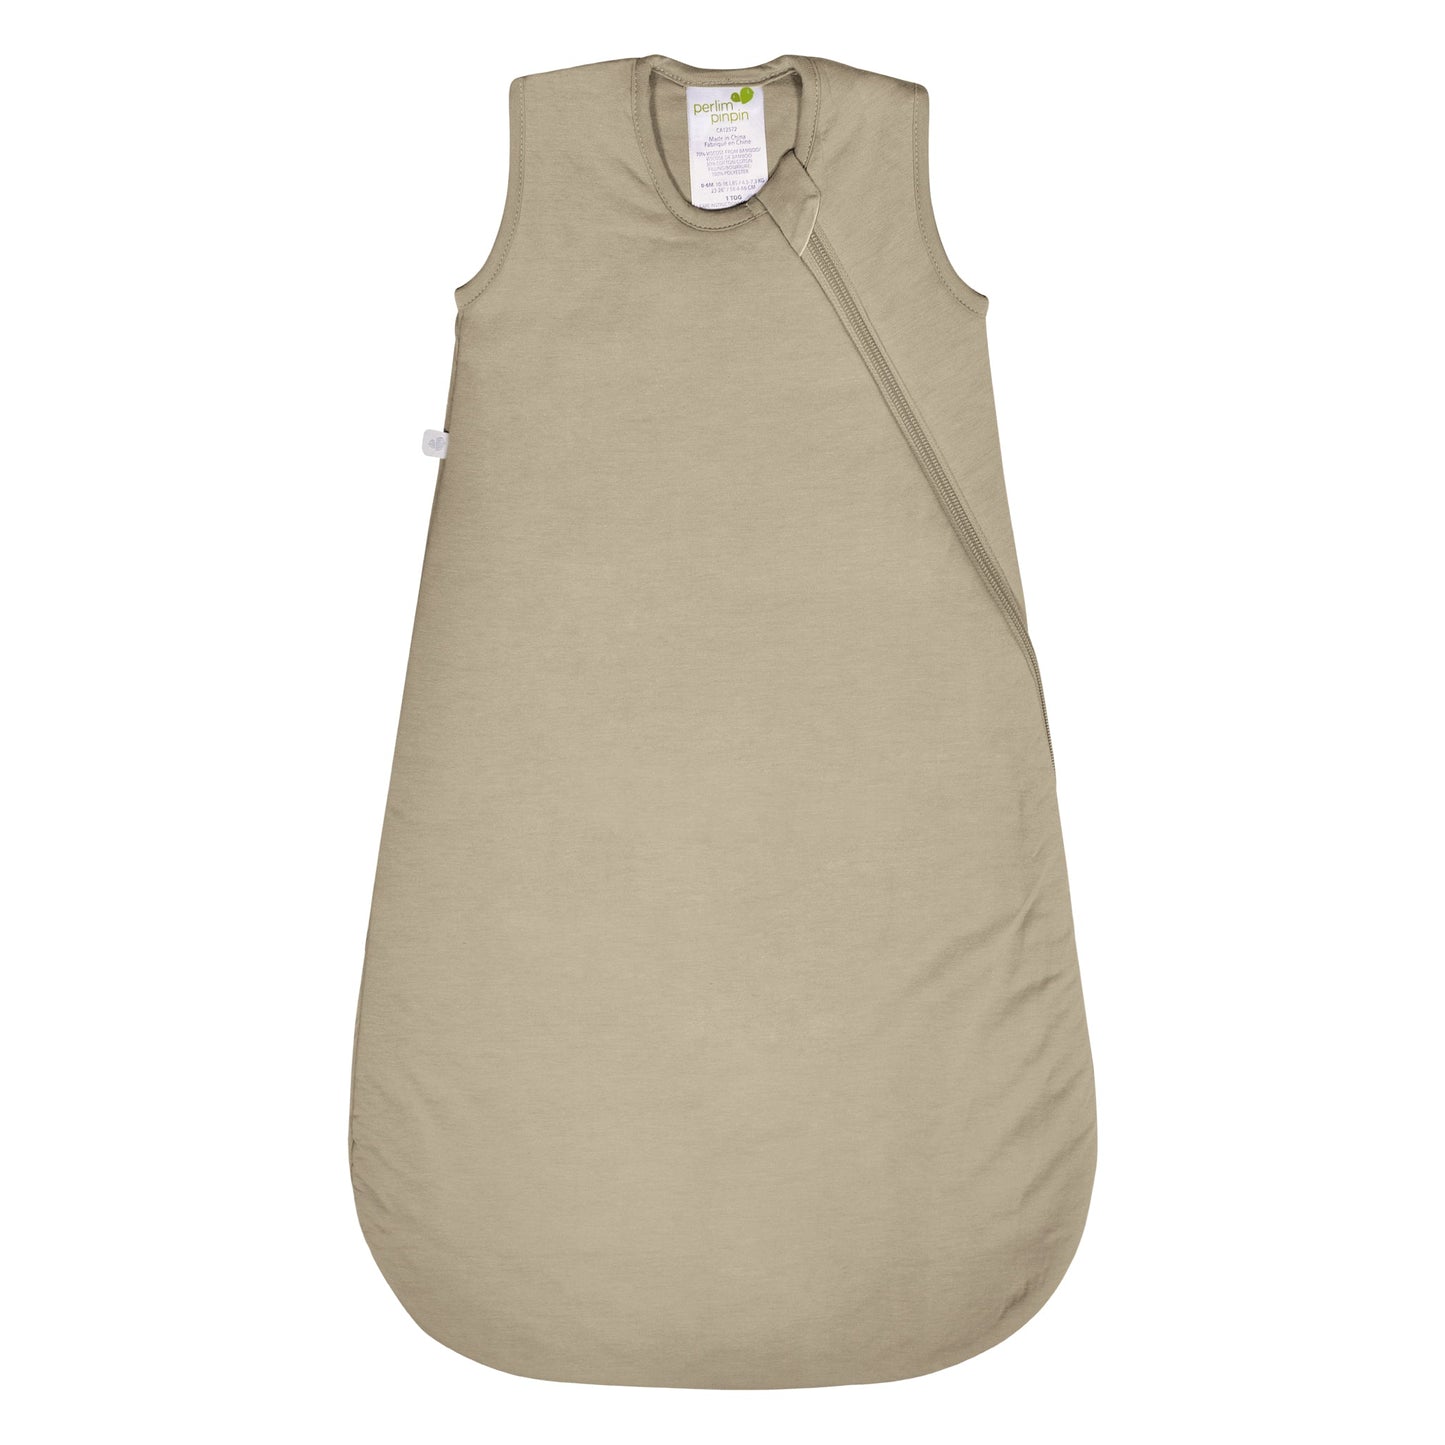 Quilted bamboo sleep bag - Taupe (2.5 togs)